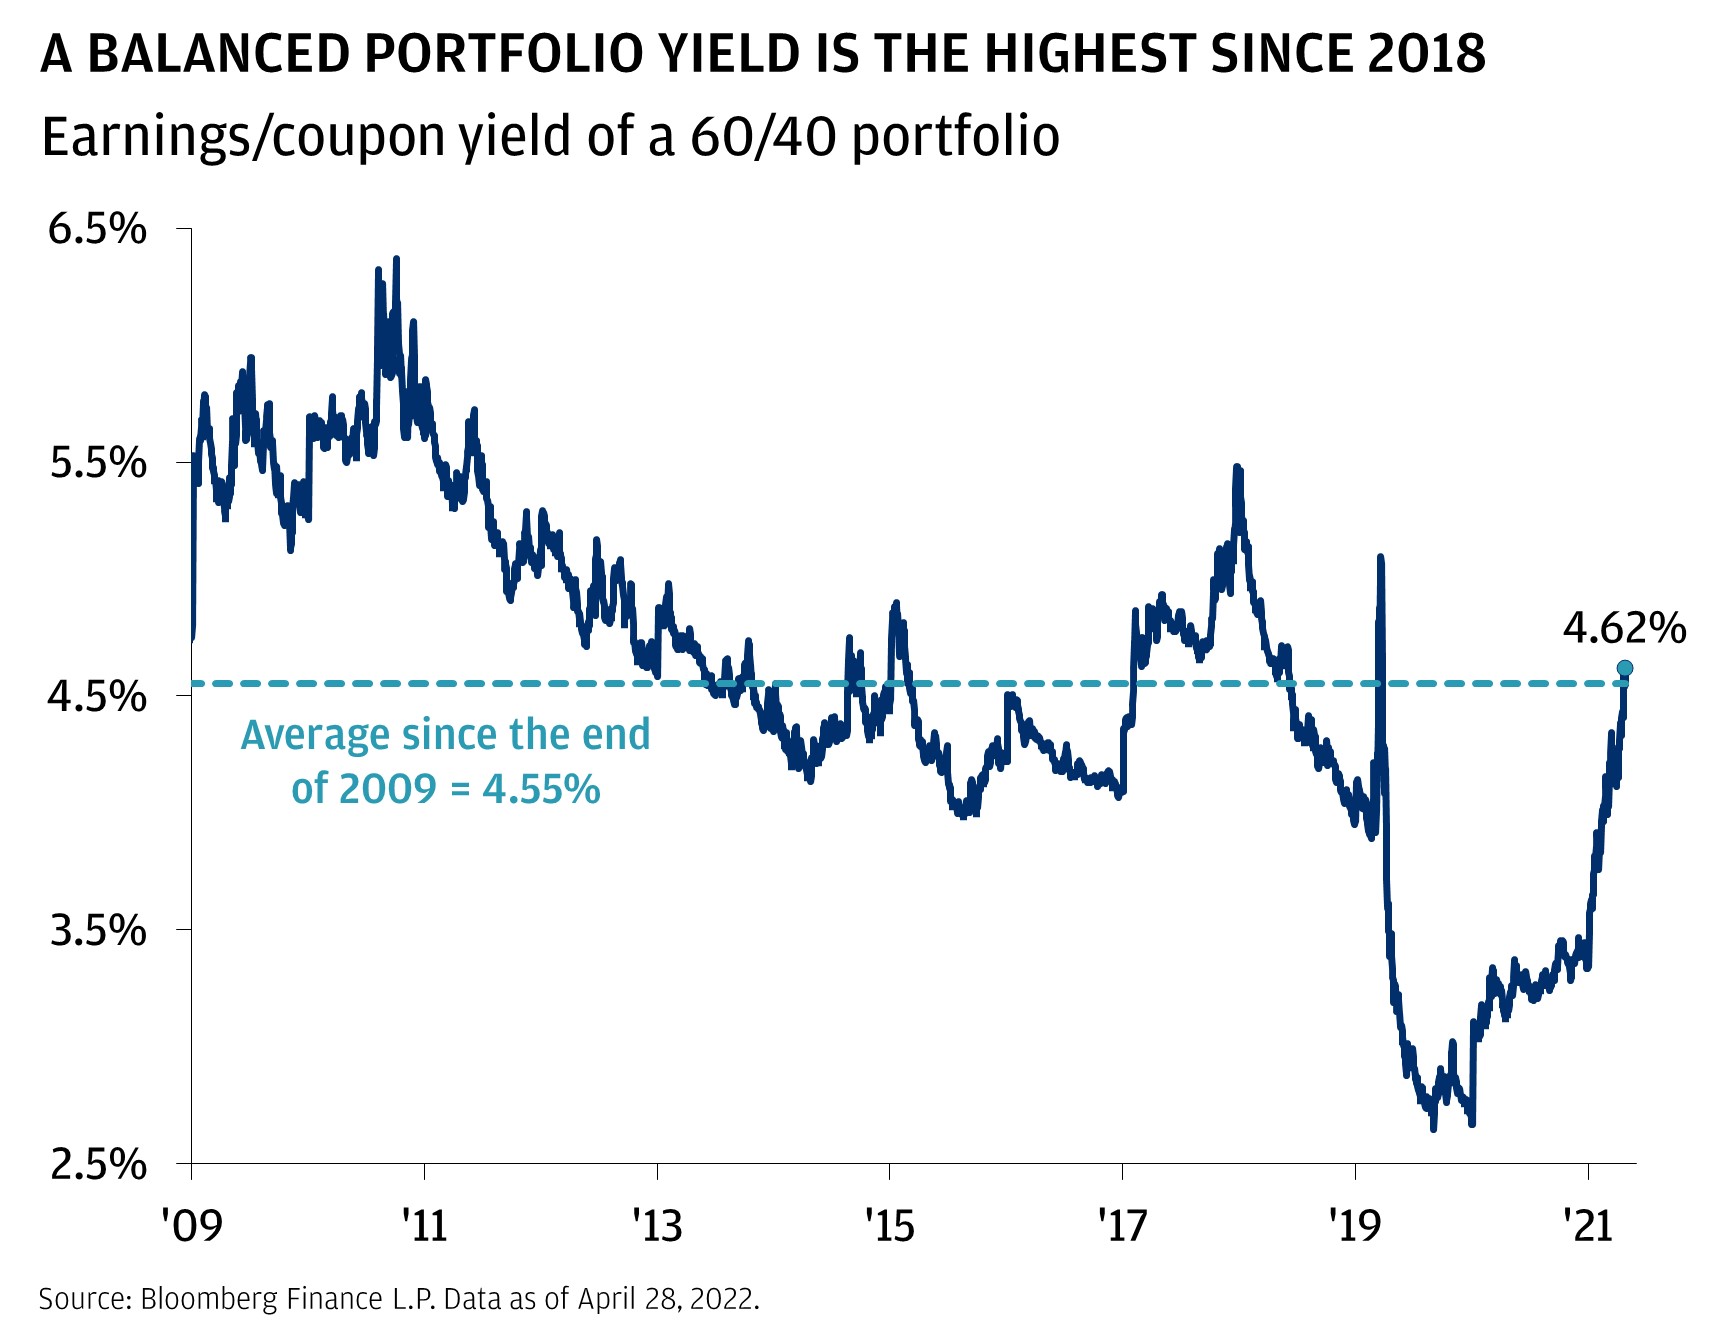 This chart shows the earnings/coupon yield of a 60/40 portfolio from 2009 to 2022. It began at 4.7%, climbing to 6.4% in October 2011.